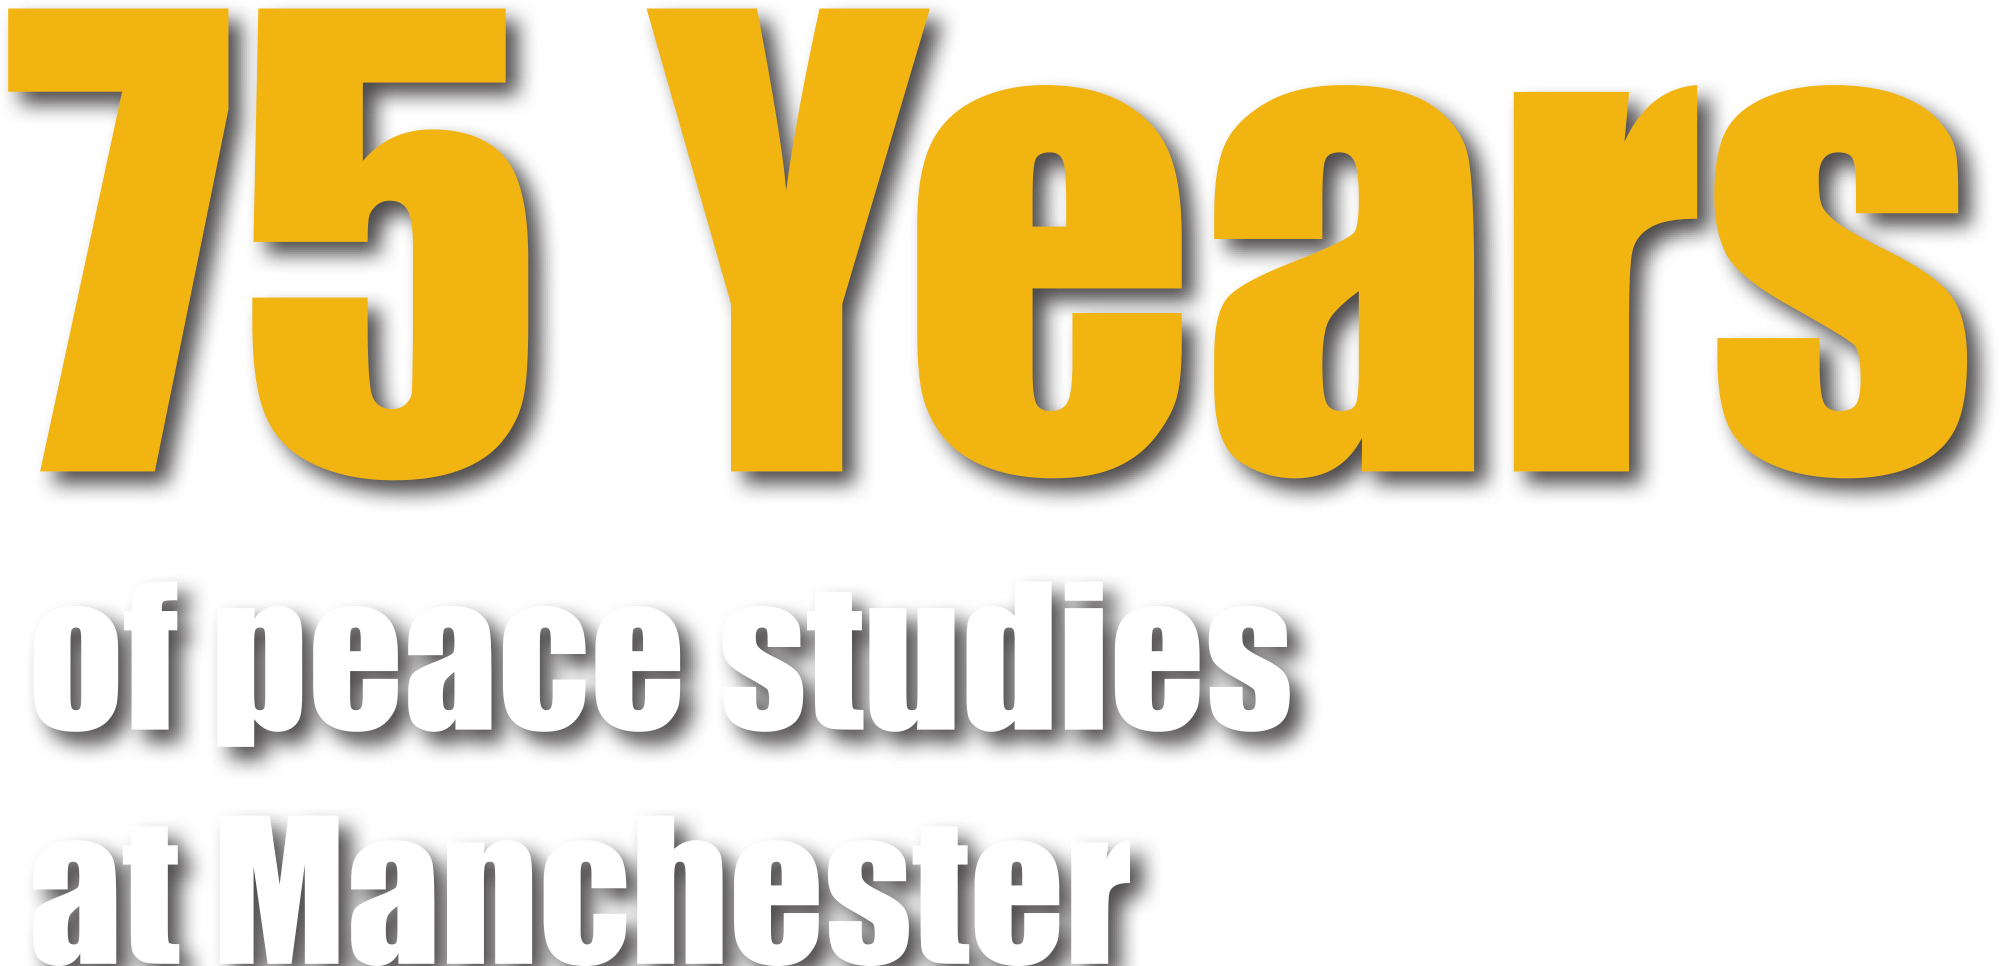 75 Years of peace studies at Manchester